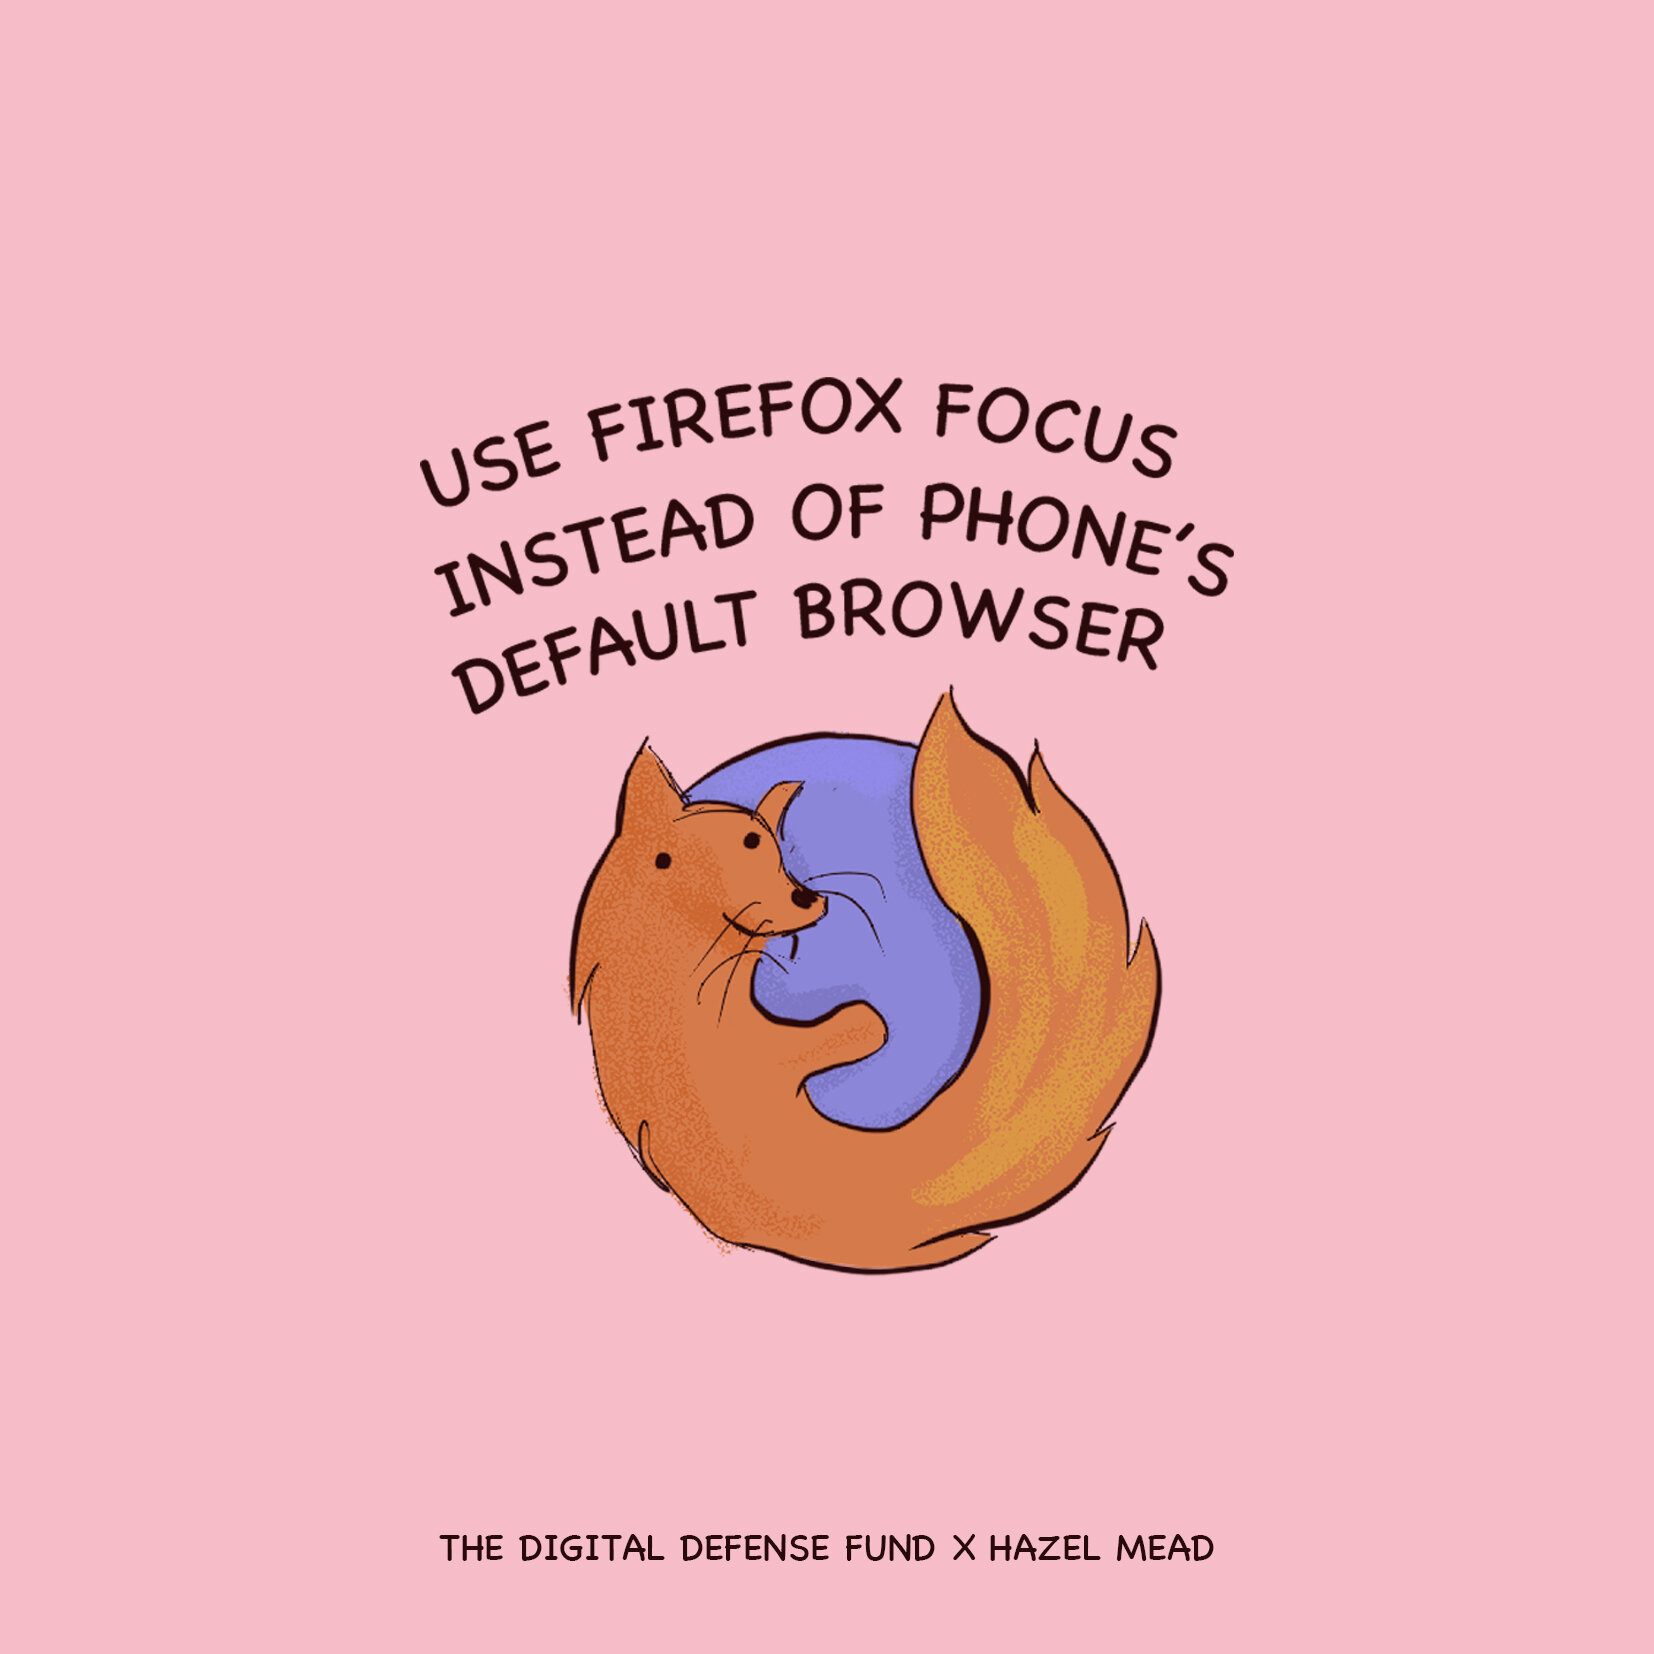 Firefox Focus logo. Clicking image leads to Firefox Focus.